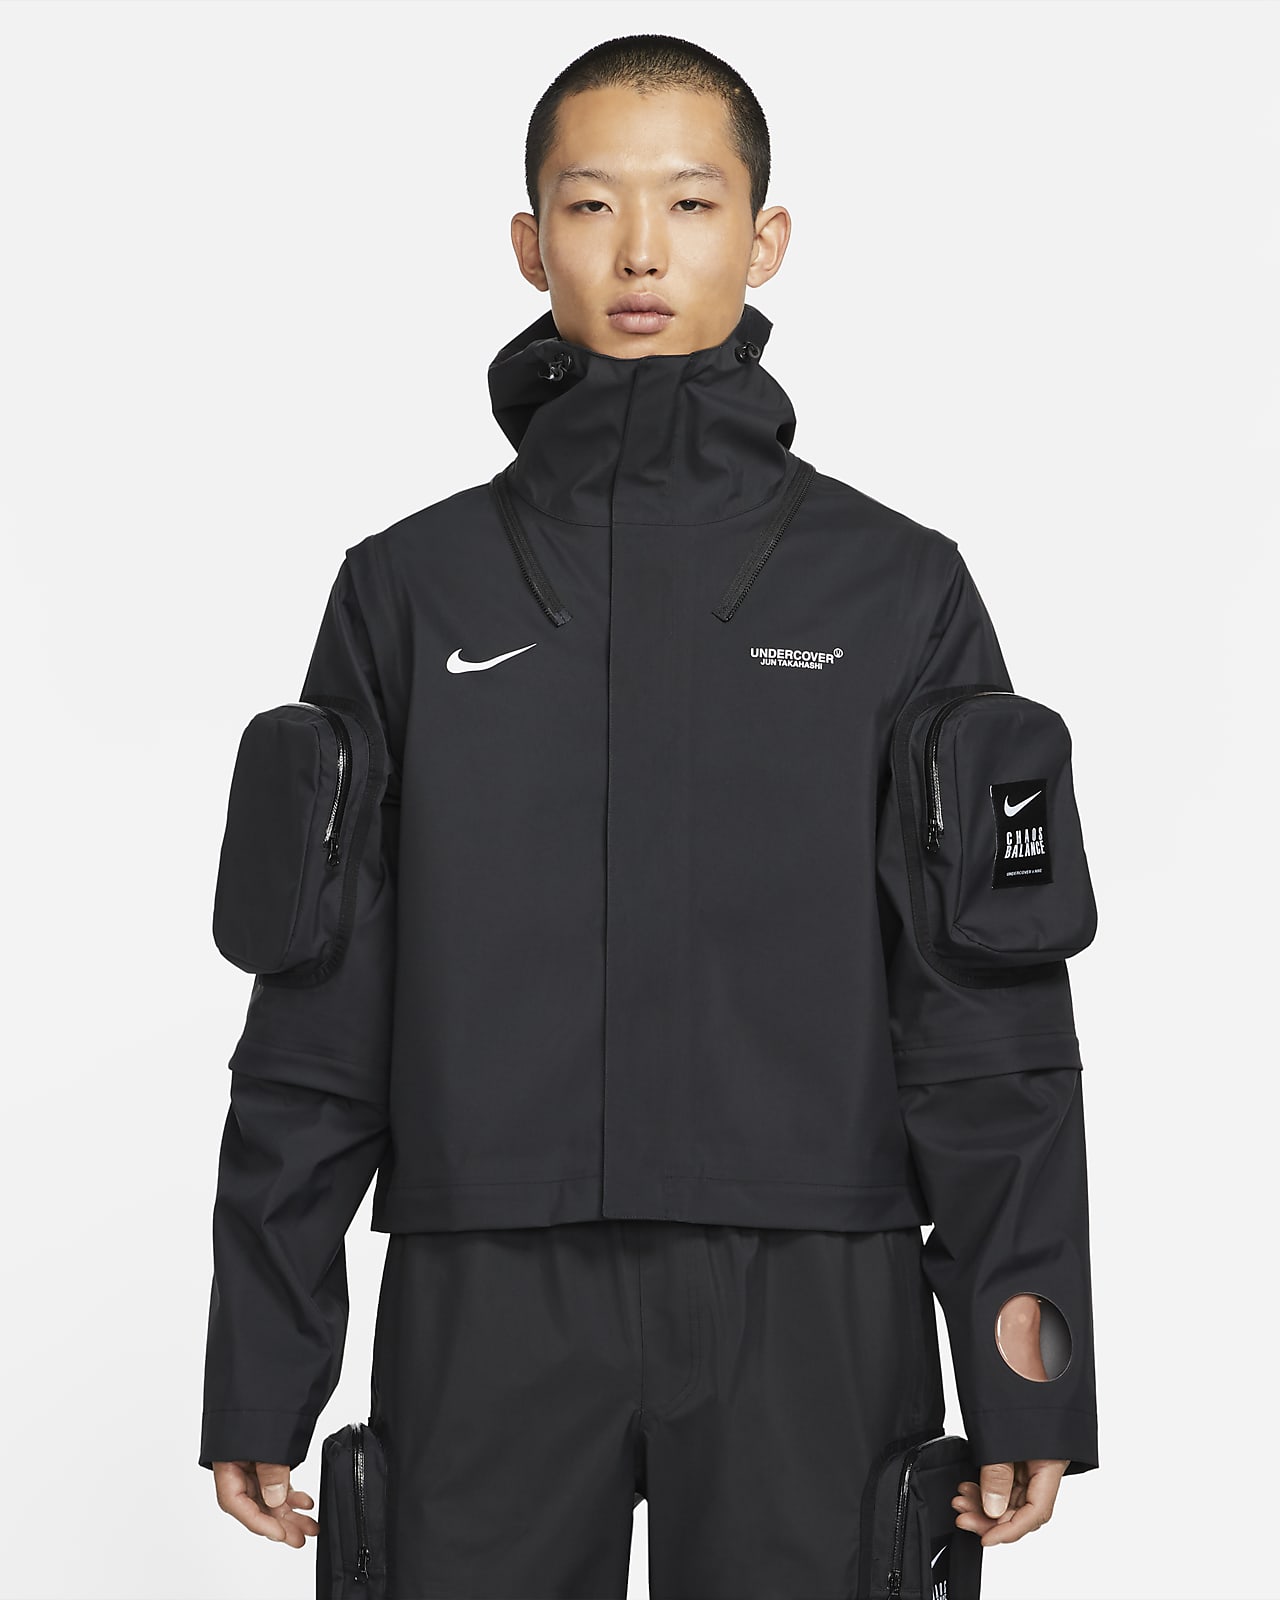 Nike x Undercover Parka